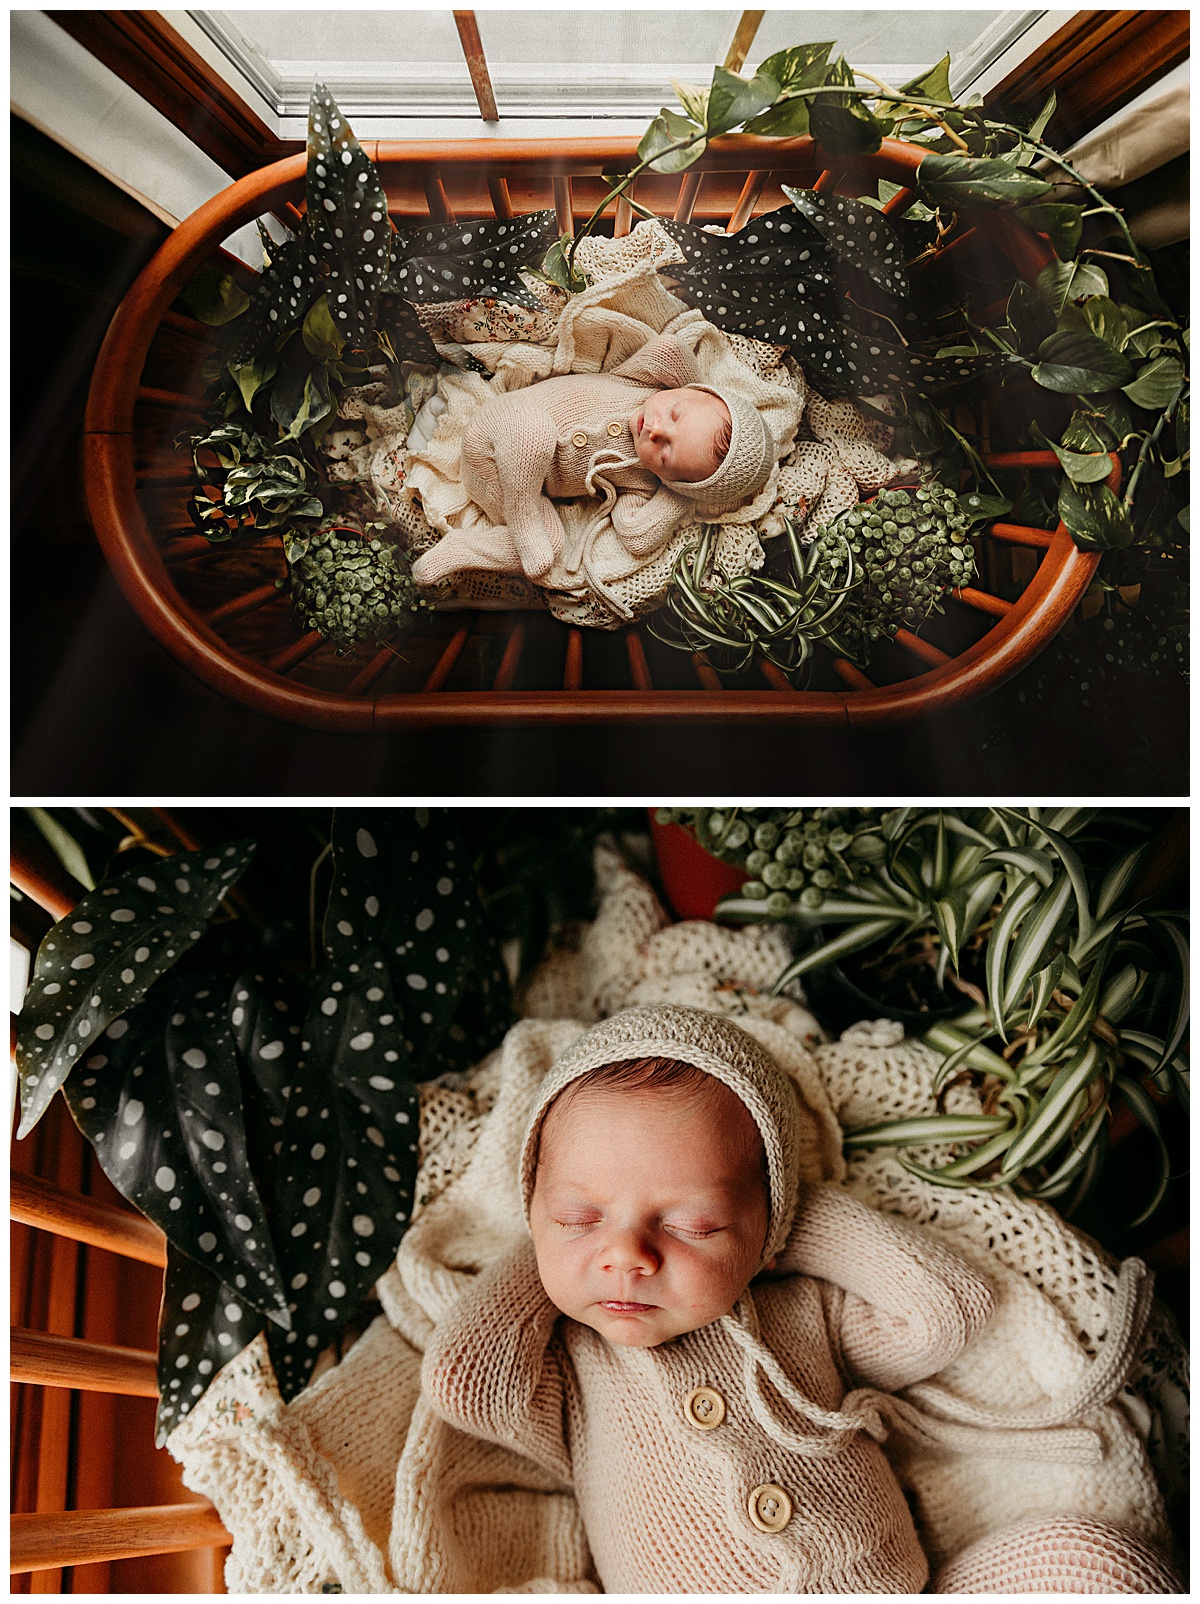 Infant lays in bassinet with greenery around for Norma Fayak Photography